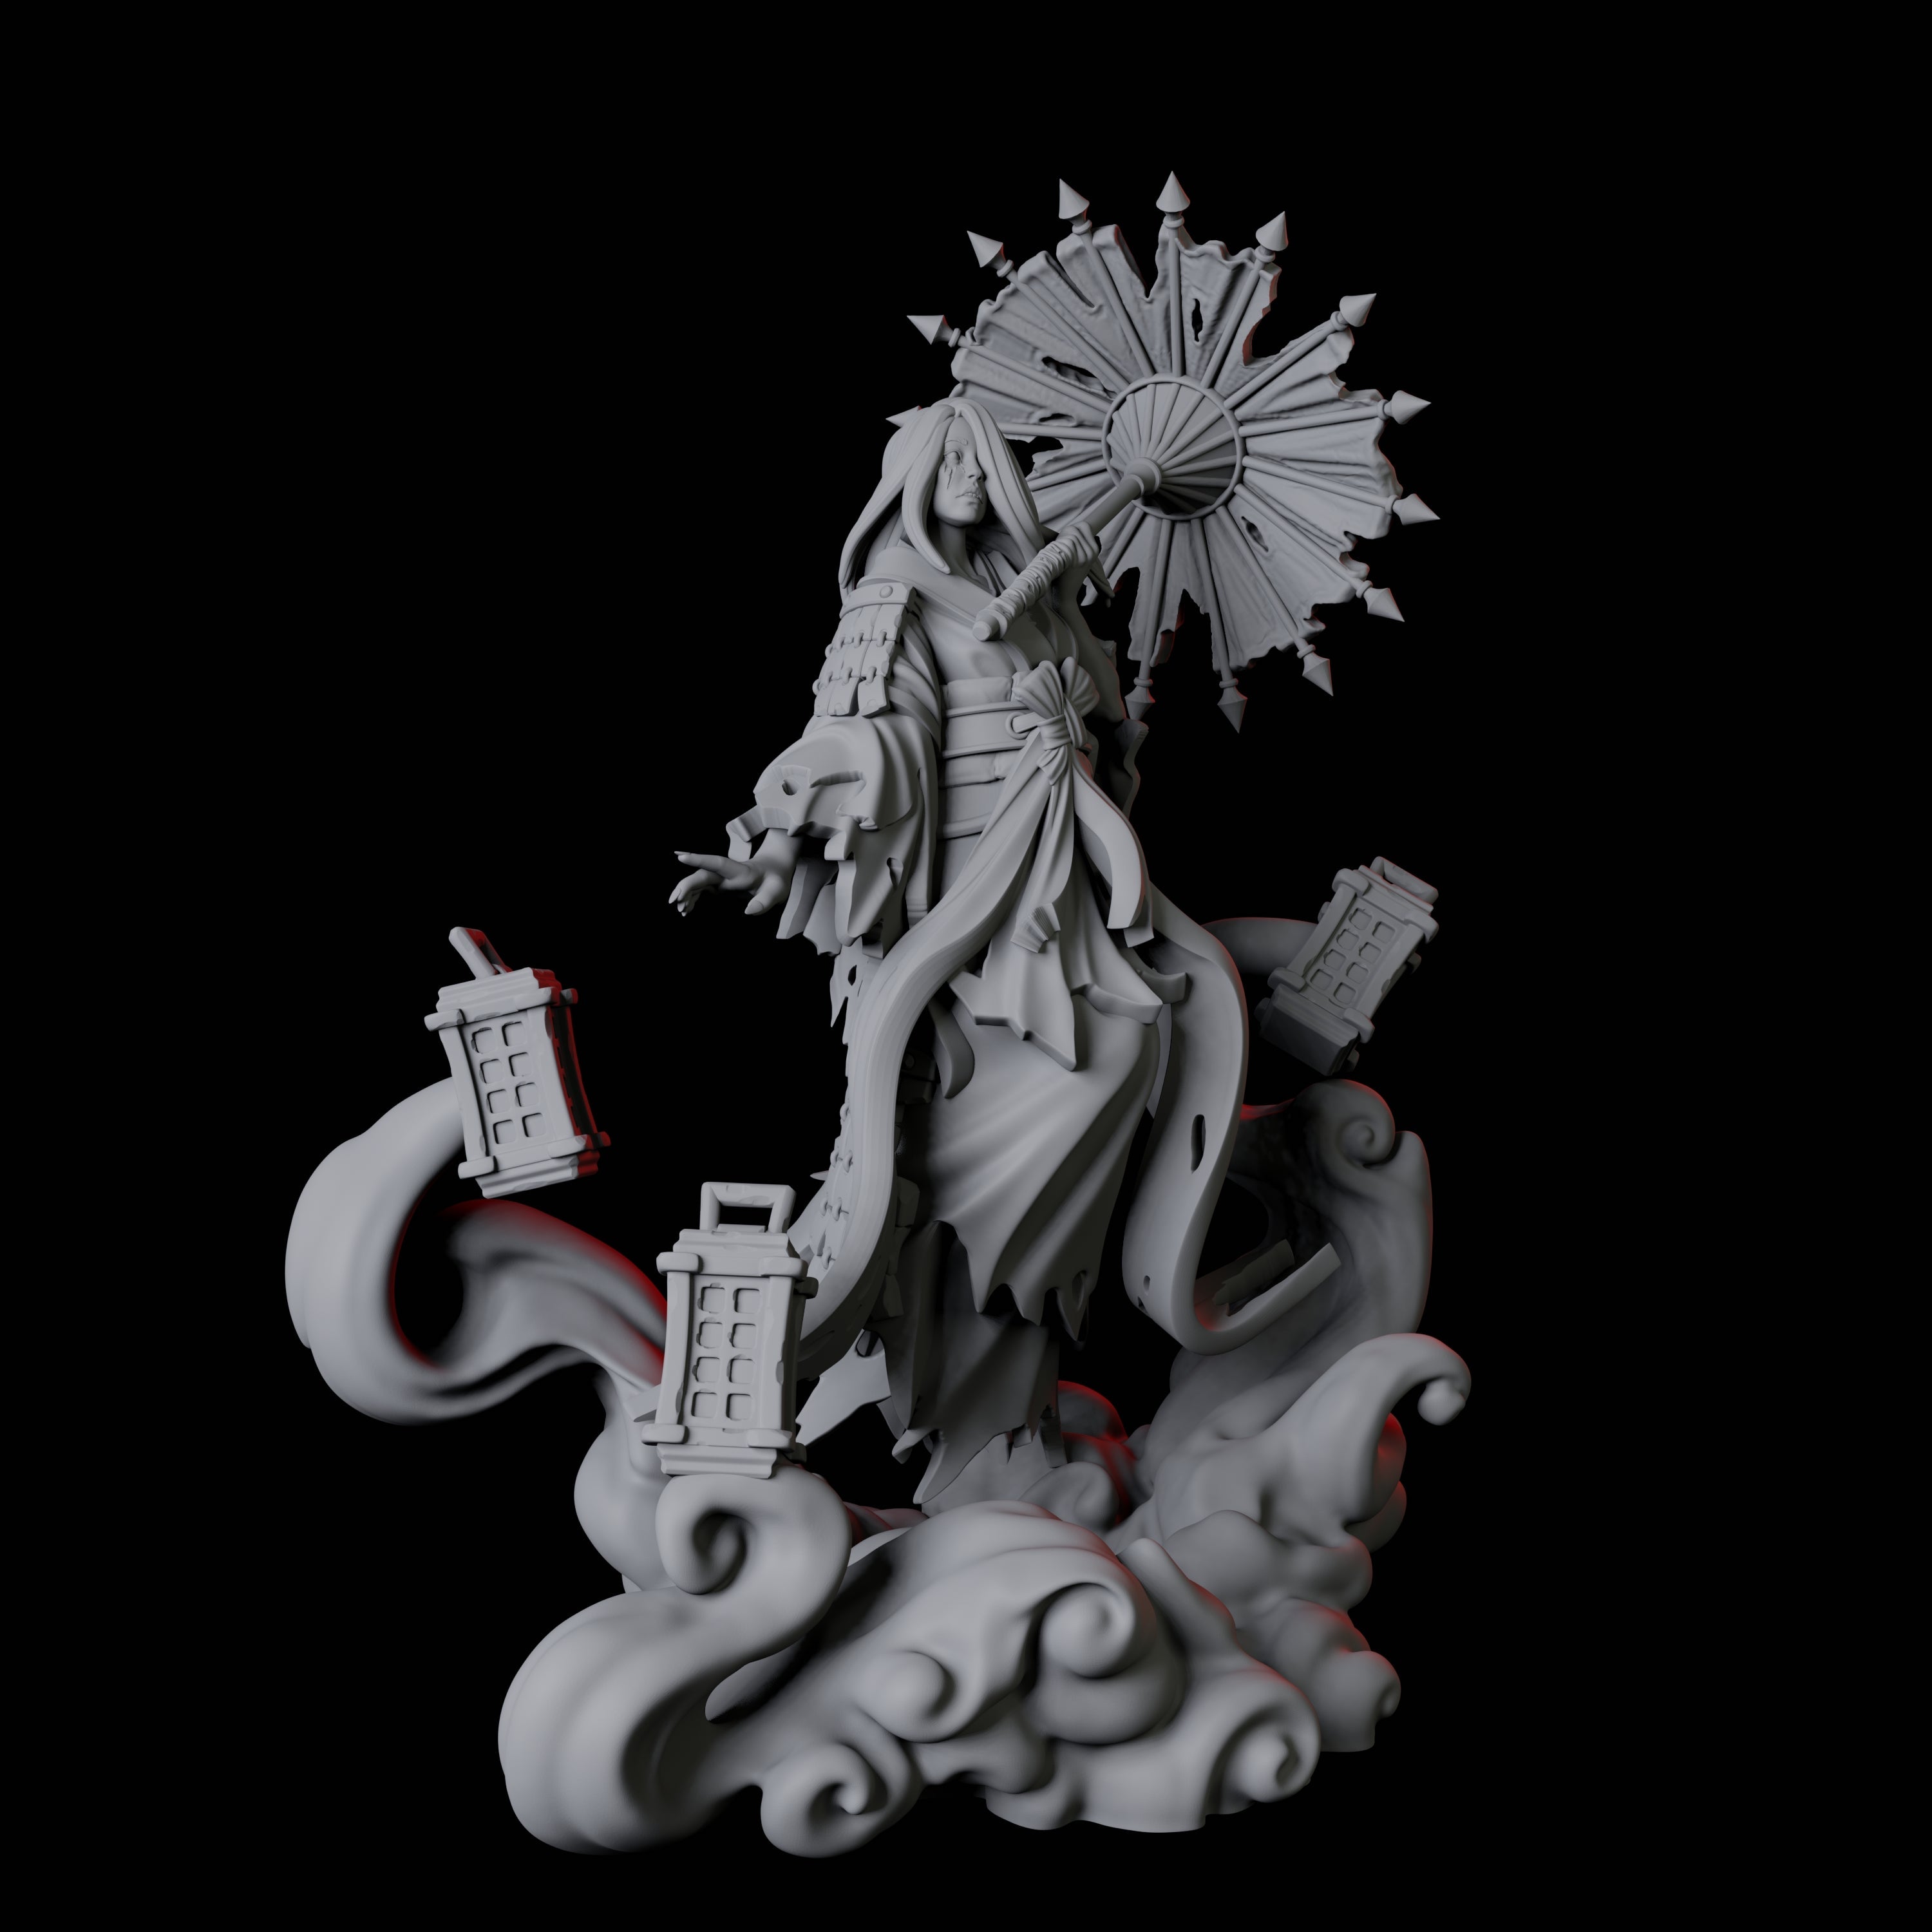 Mysterious Geisha Sorcerer A Miniature for Dungeons and Dragons, Pathfinder or other TTRPGs